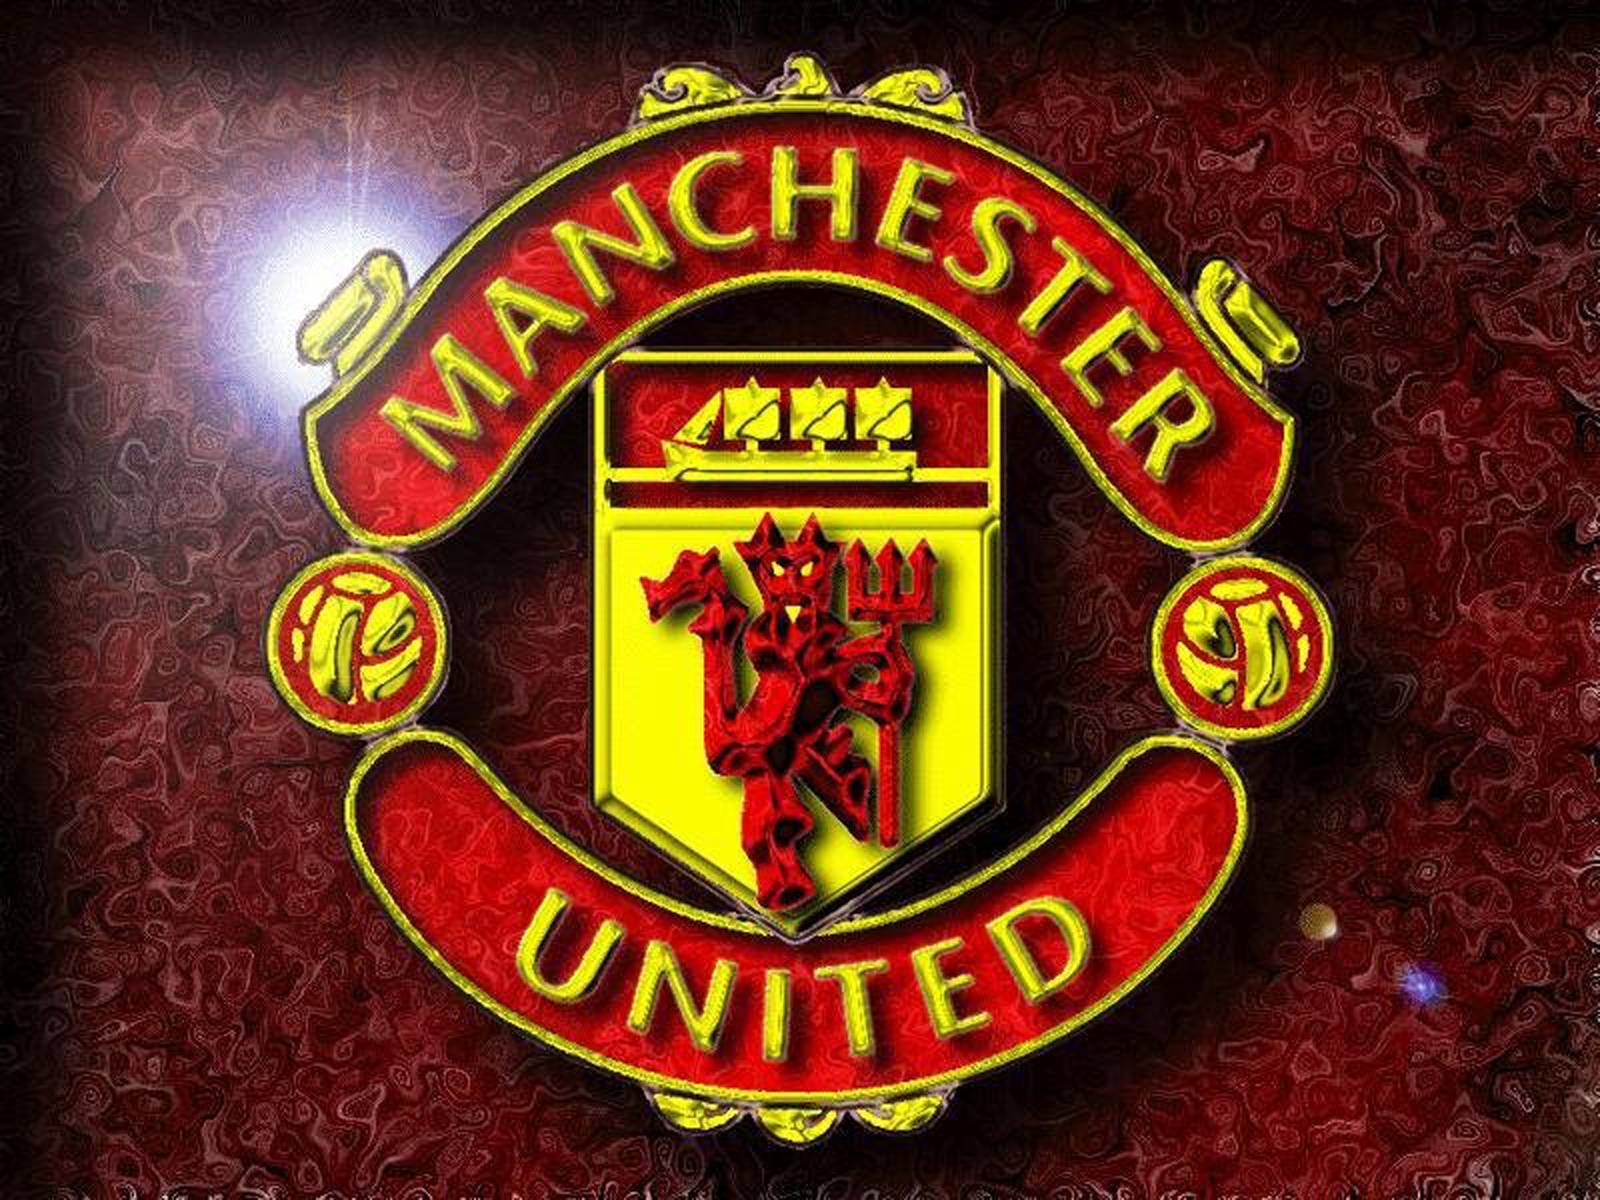 Manchester United 4K Wallpapers - Wallpaper Cave